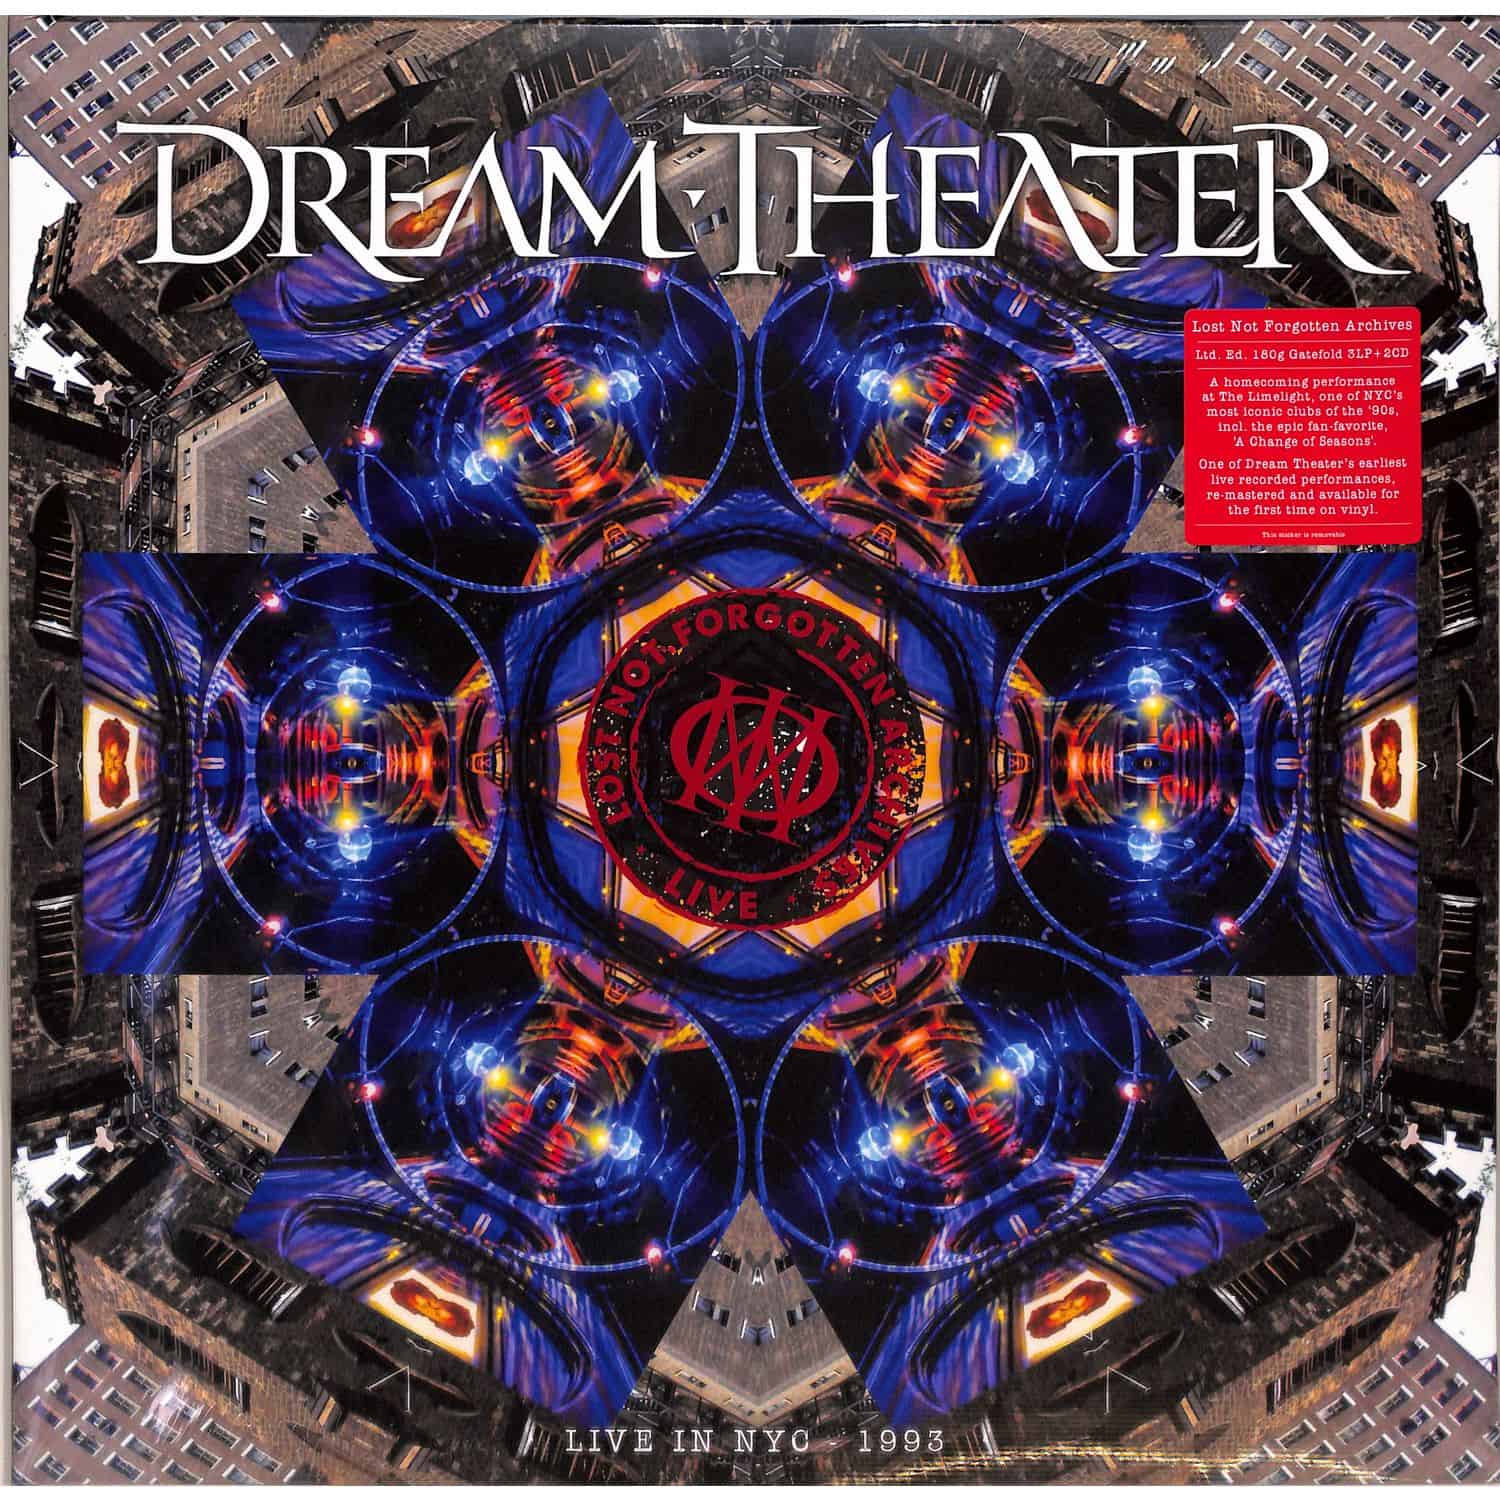 Dream Theater - LOST NOT FORGOTTEN ARCHIVES: LIVE IN NYC-1993 